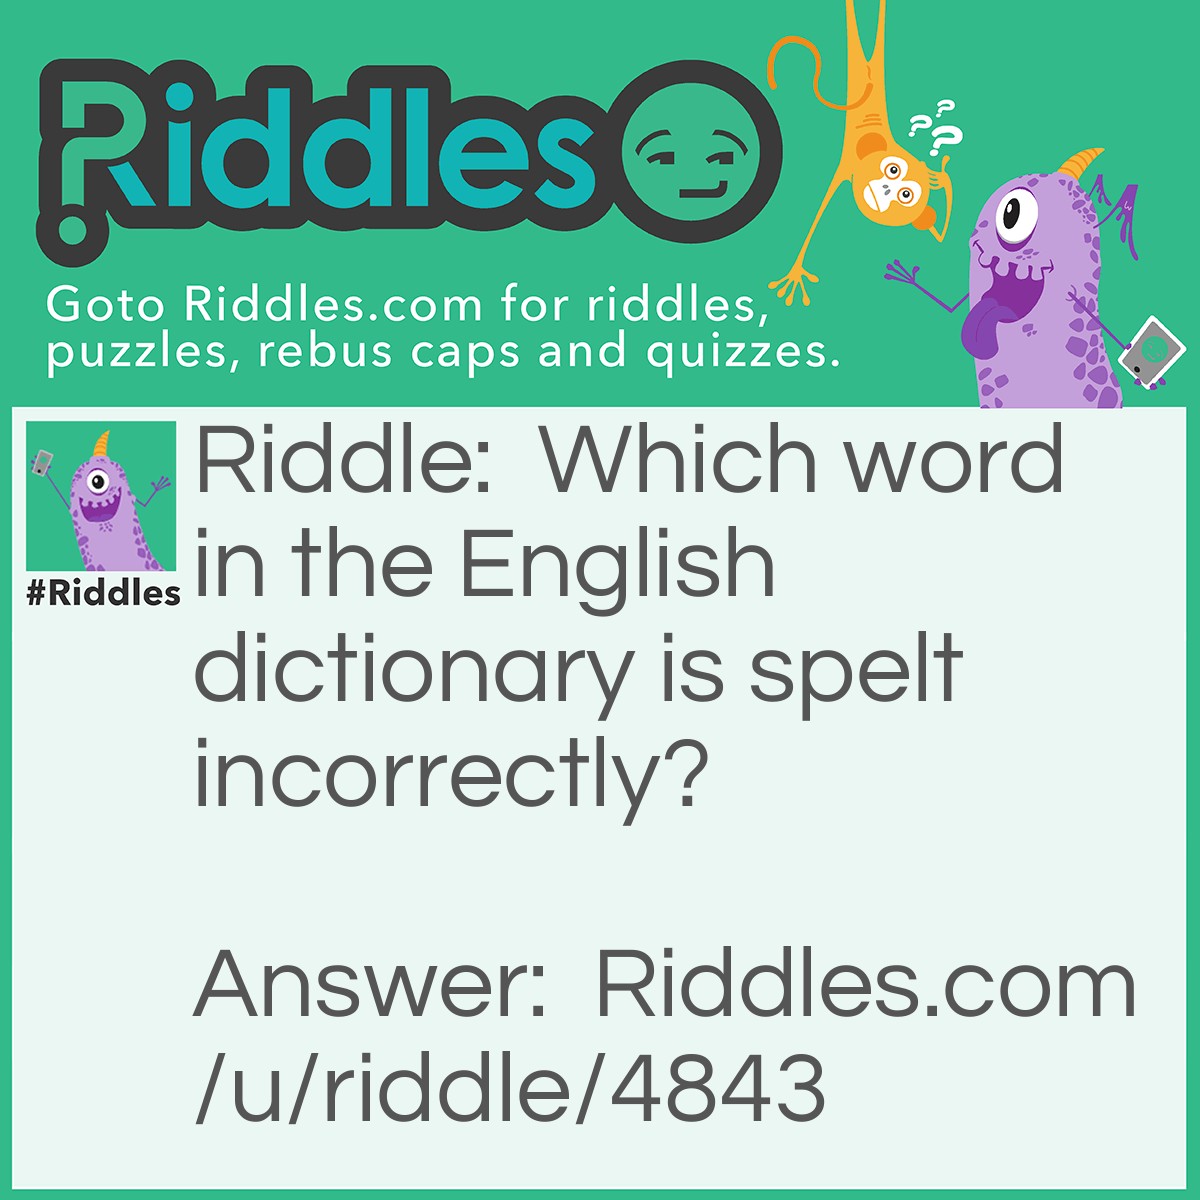 Riddle: Which word in the English dictionary is spelt incorrectly? Answer: Incorrectly.